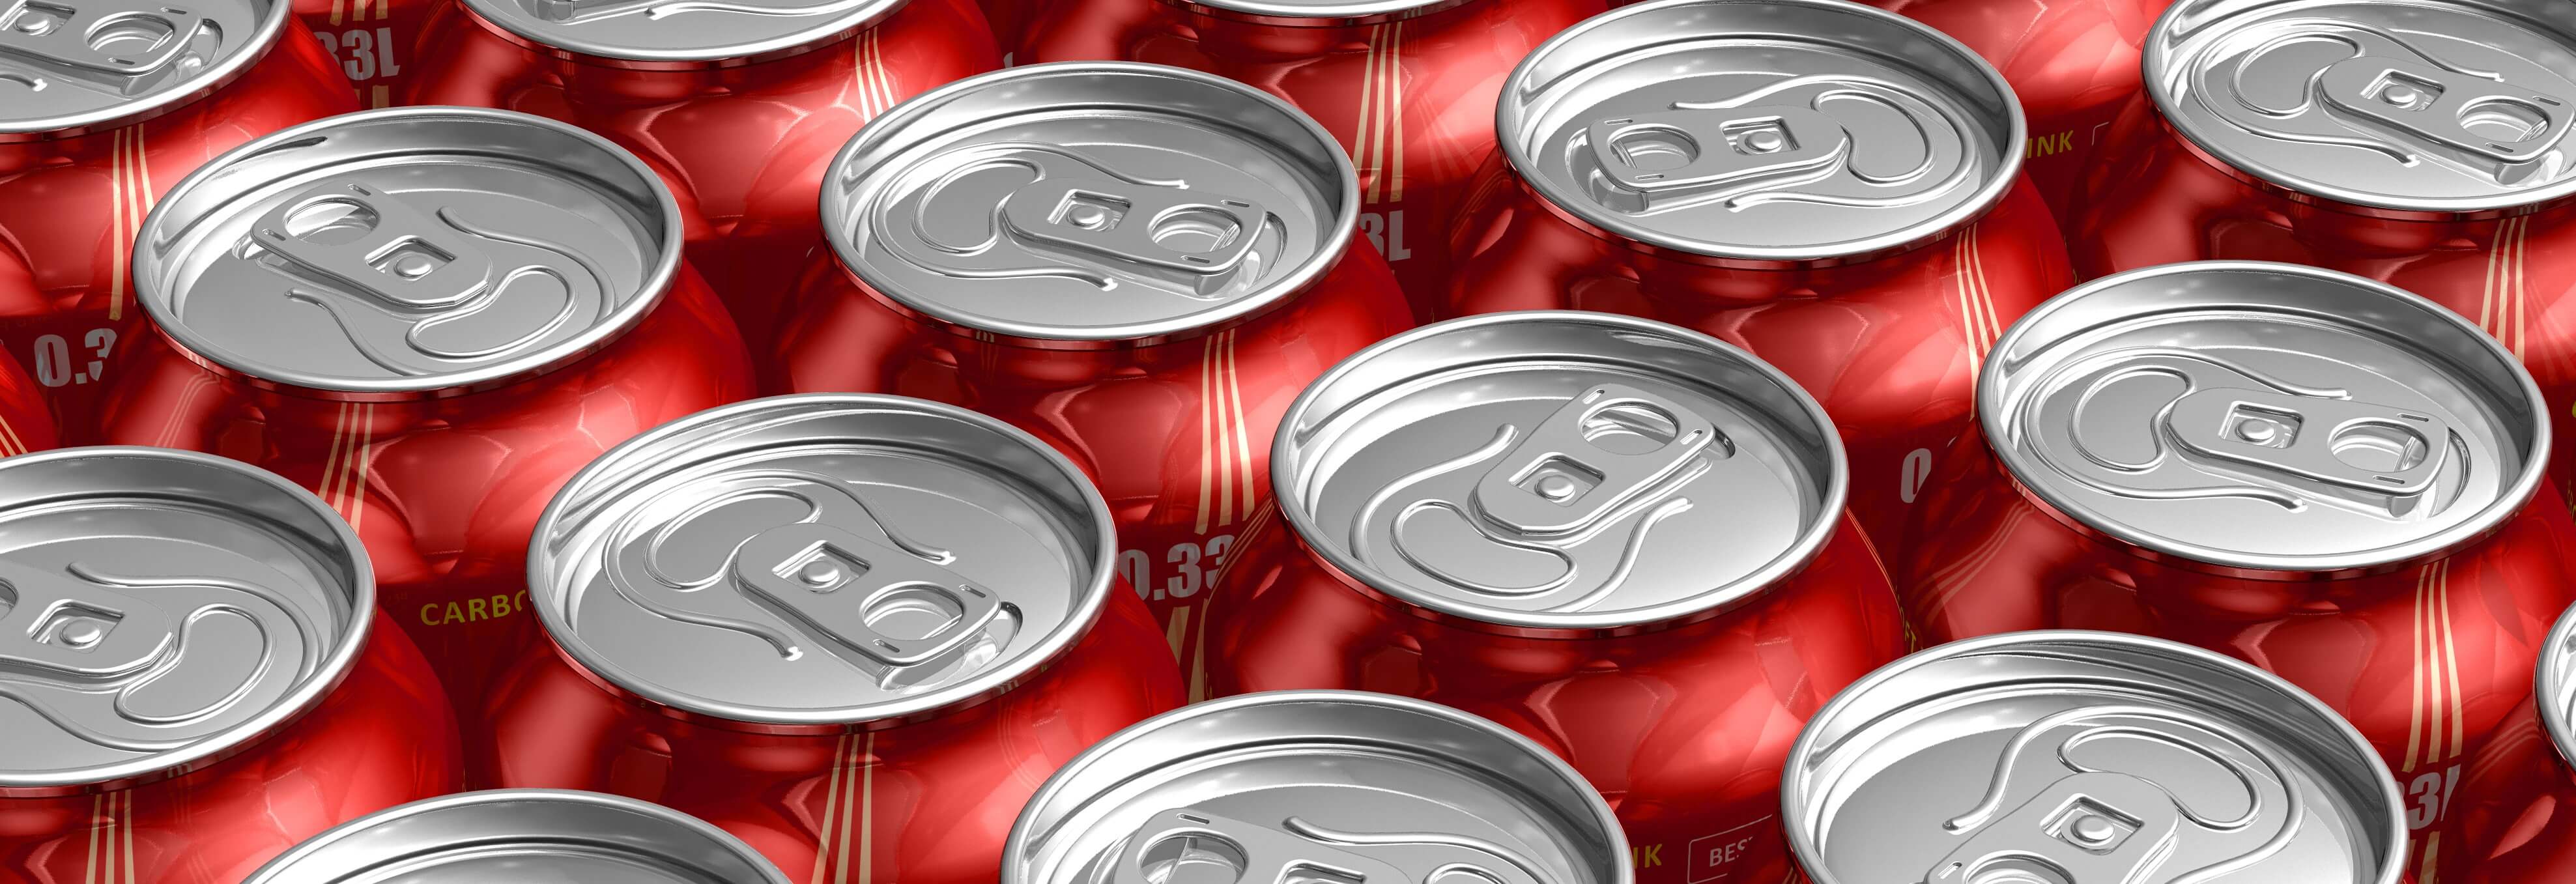 cans of coke